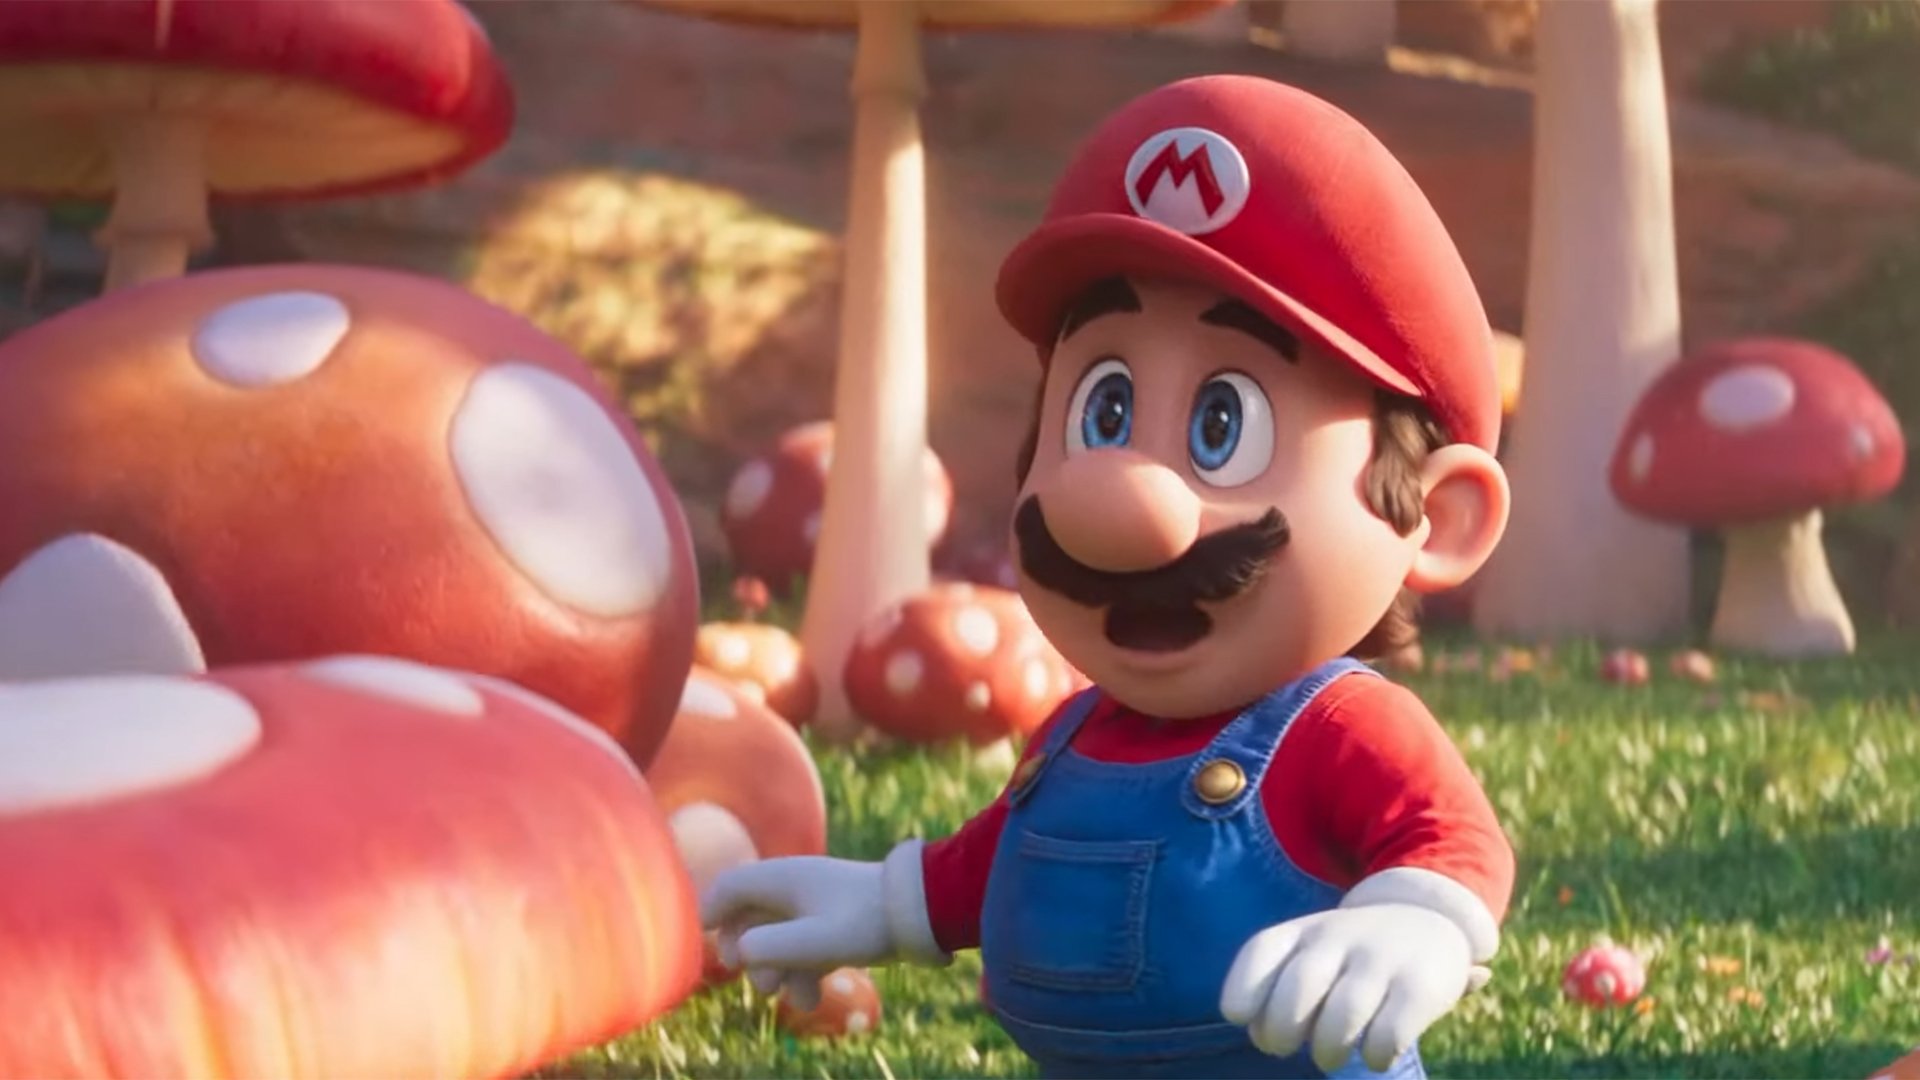 Super Mario Bros. Movie image and details have seemingly leaked ahead of today's trailer